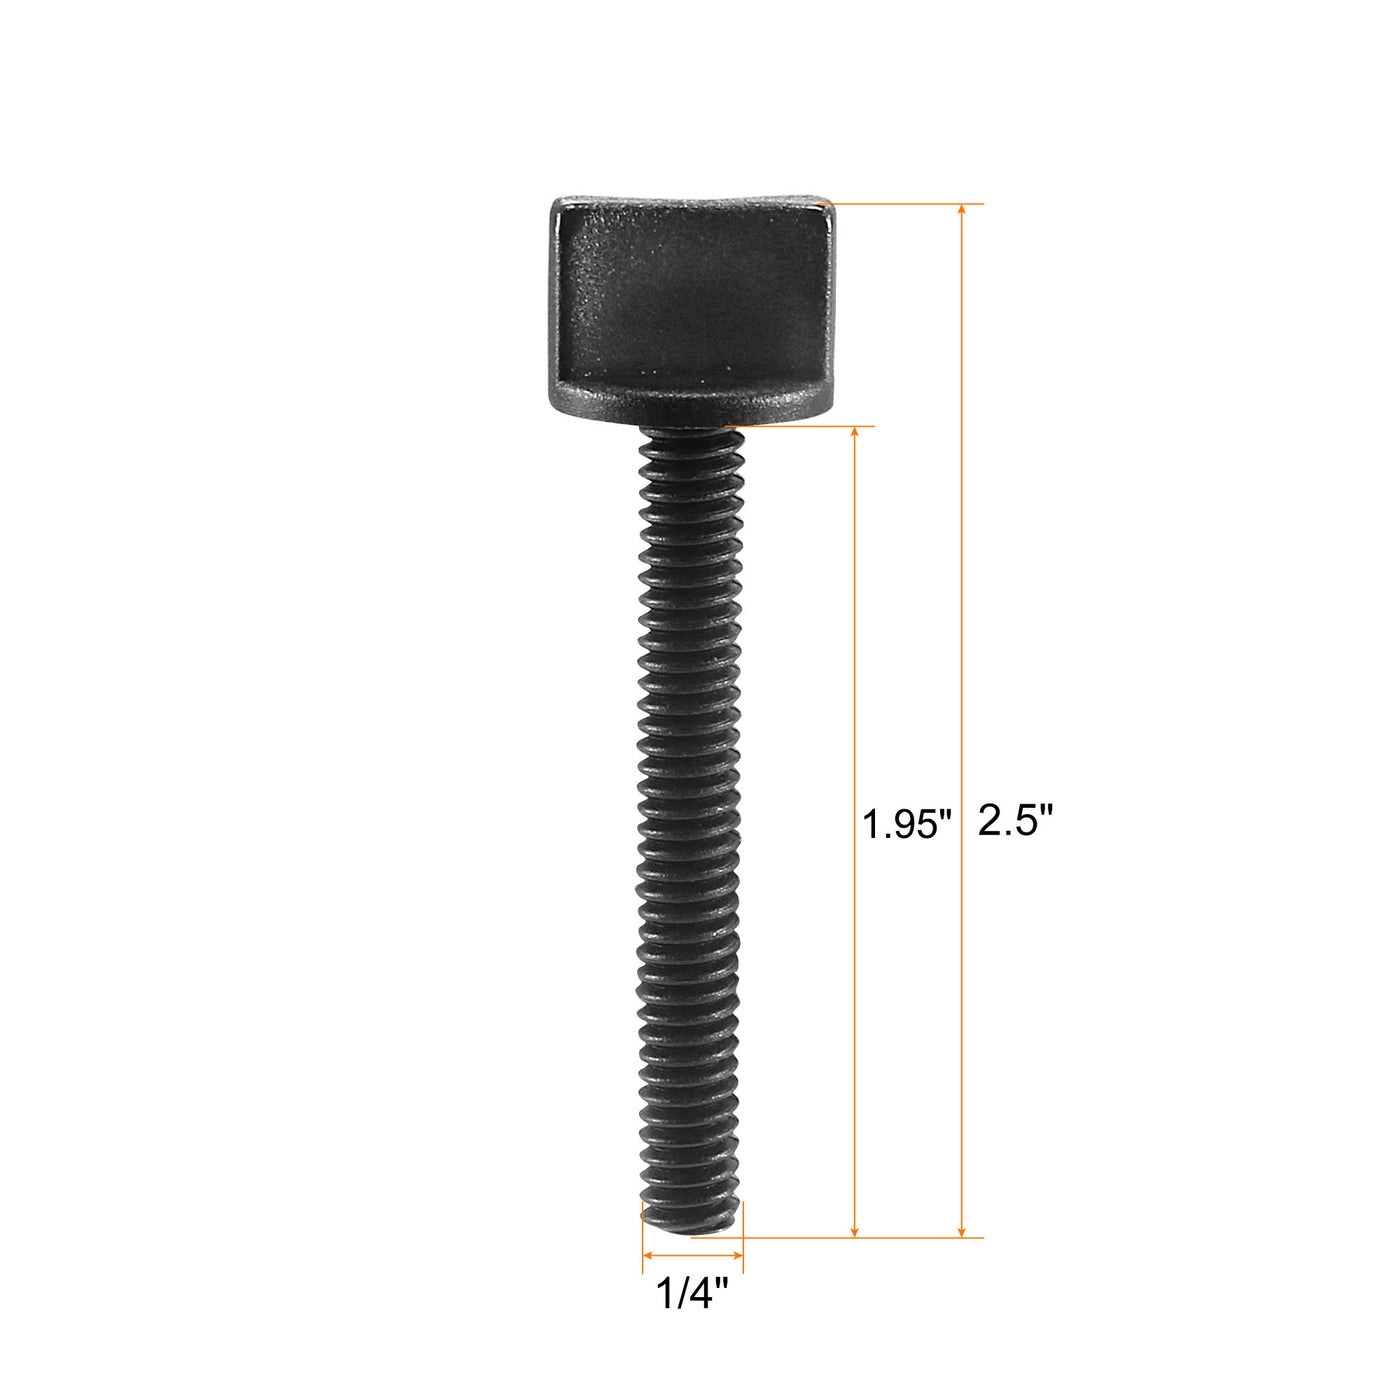 uxcell Uxcell 1/4" x 2 Inches Thumb Screw Bolt Hand Driven Spade Plastic Screws British Standard Thread for RC Model Aircraft 5 Pcs